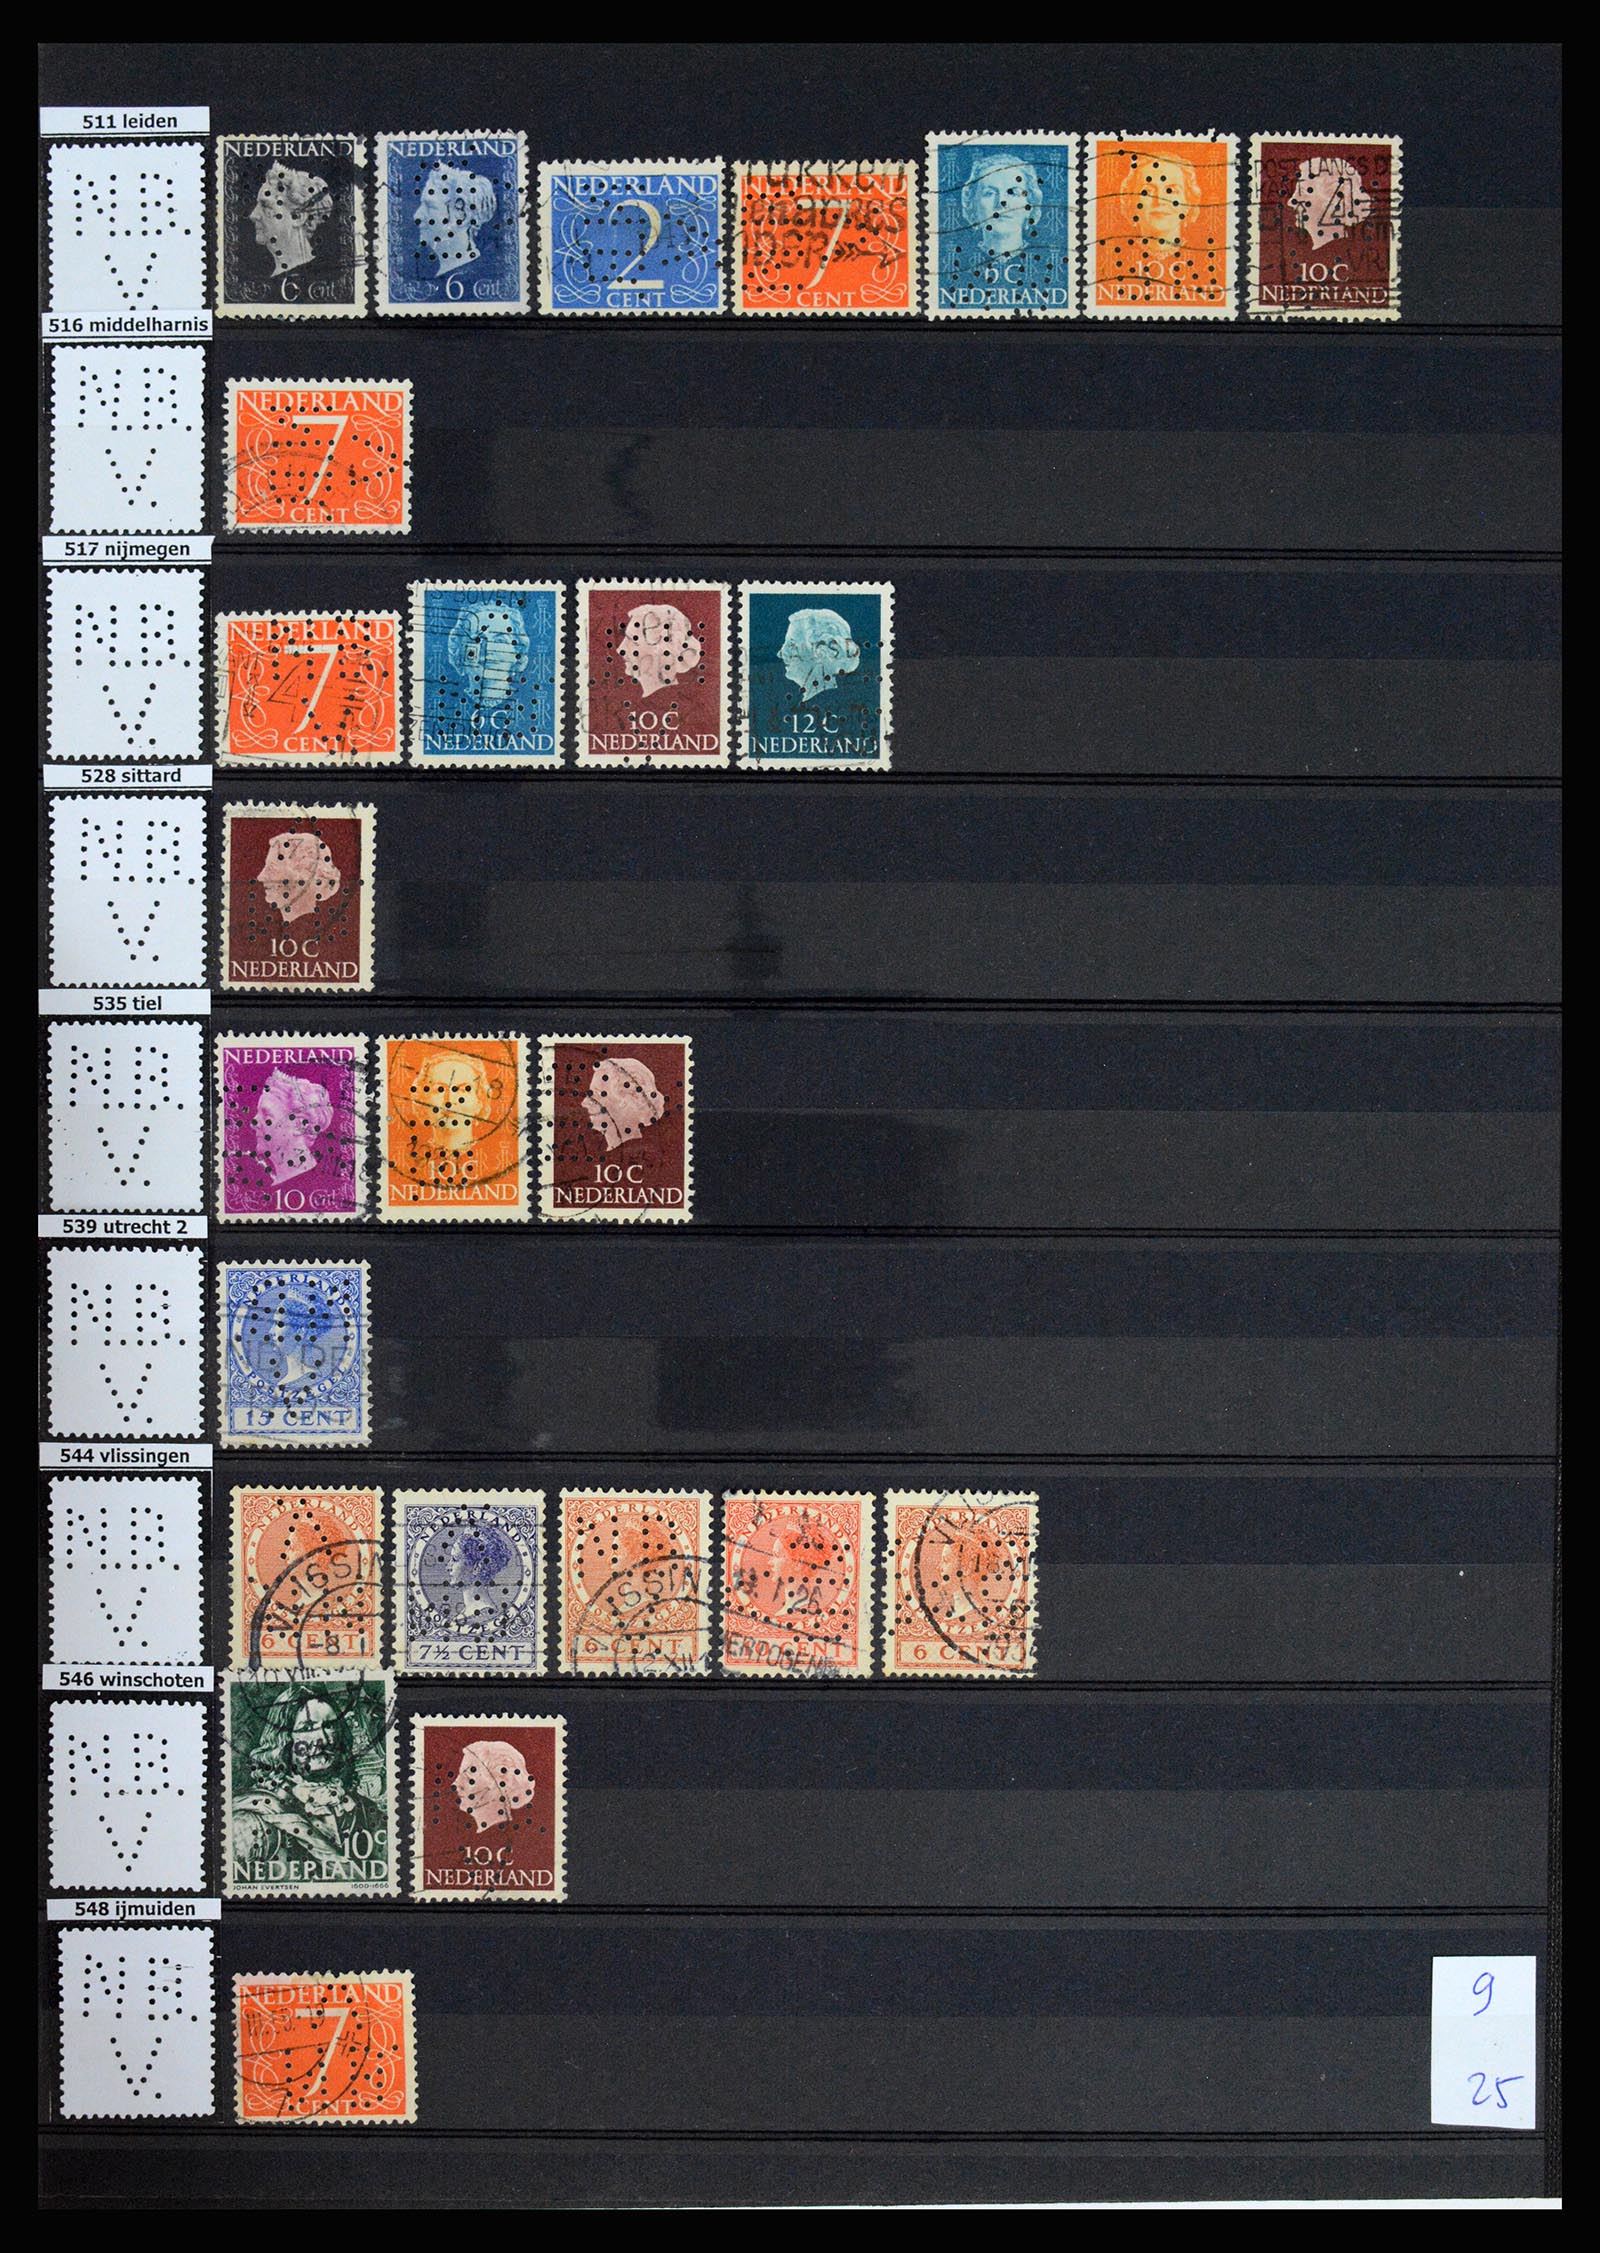 37183 037 - Stamp collection 37183 Netherlands perfins 1872-1960.